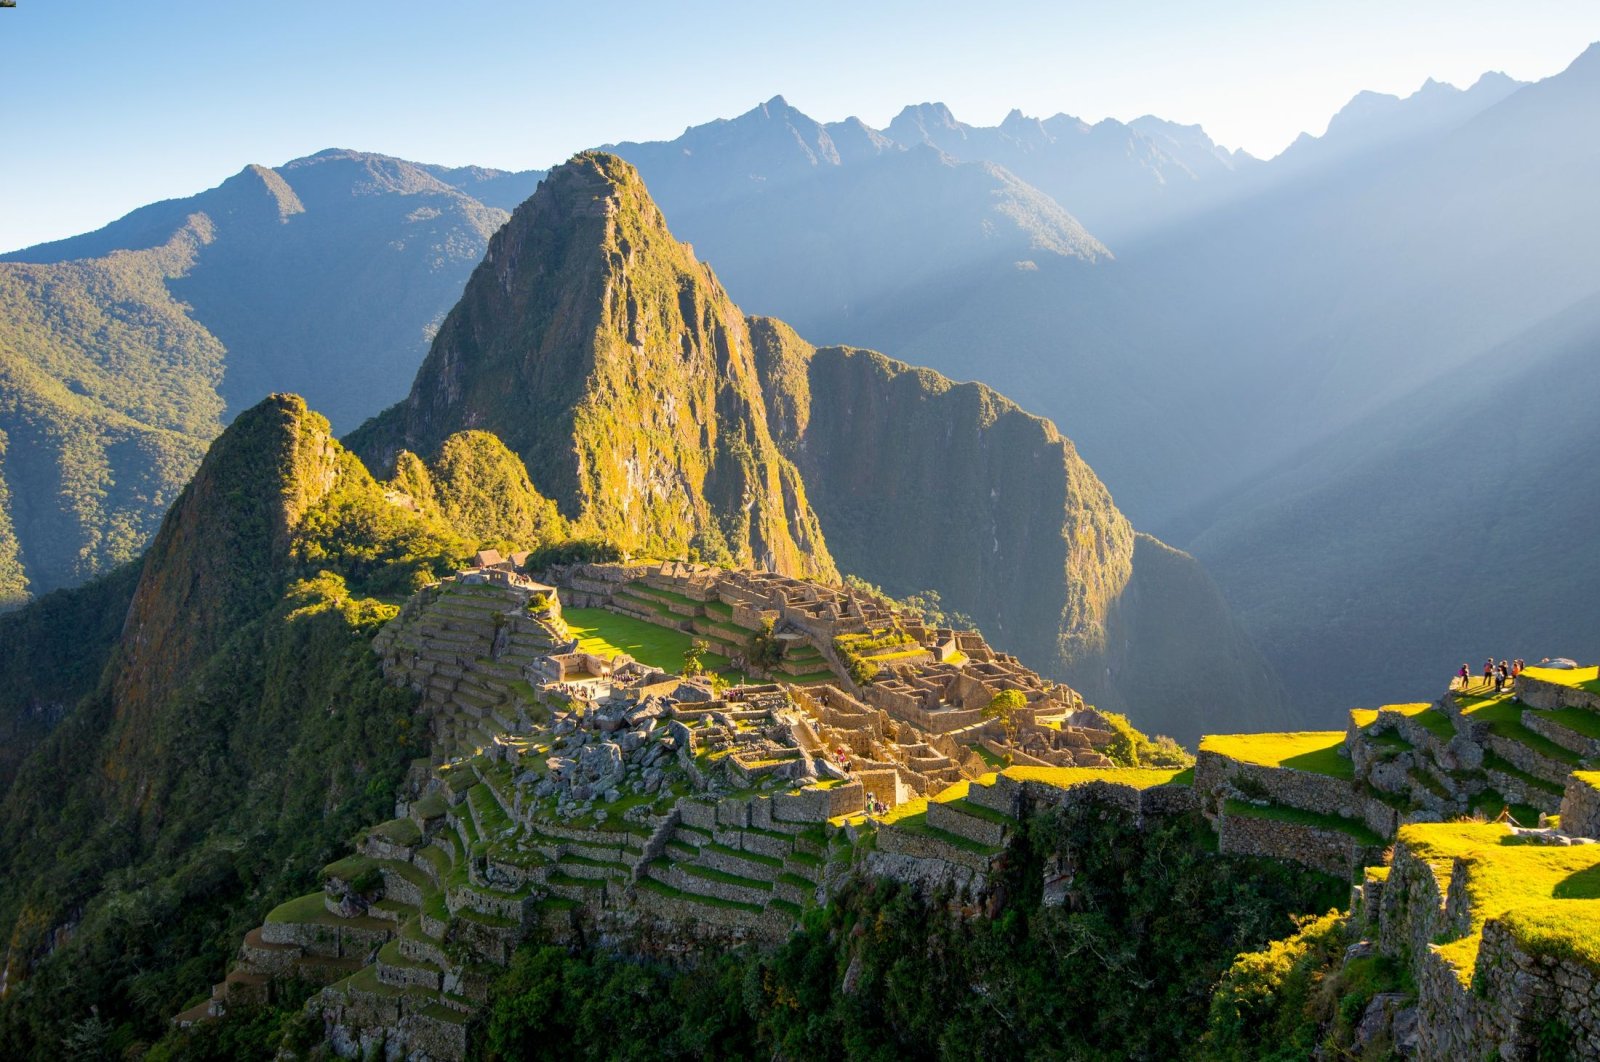 Machu Picchu has been suffering from climate change as well with landslides in the Andes mountains, Peru. (Shutterstock Photo)